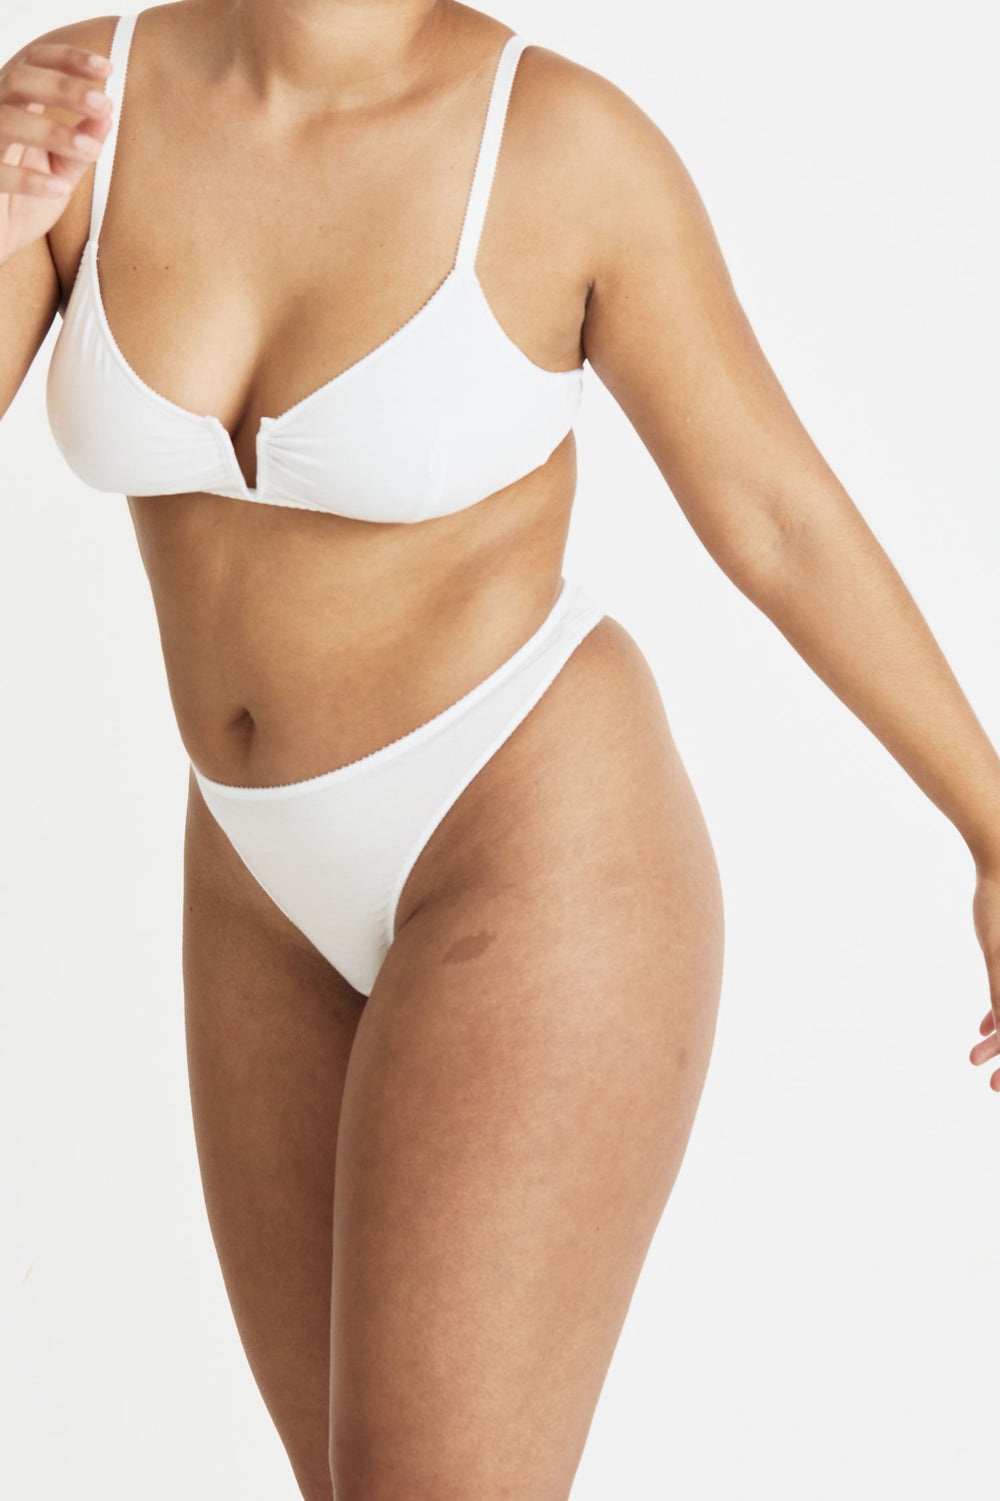 Videris Lingerie thong in white TENCEL™ a comfortable mid-rise style that elongates the legs